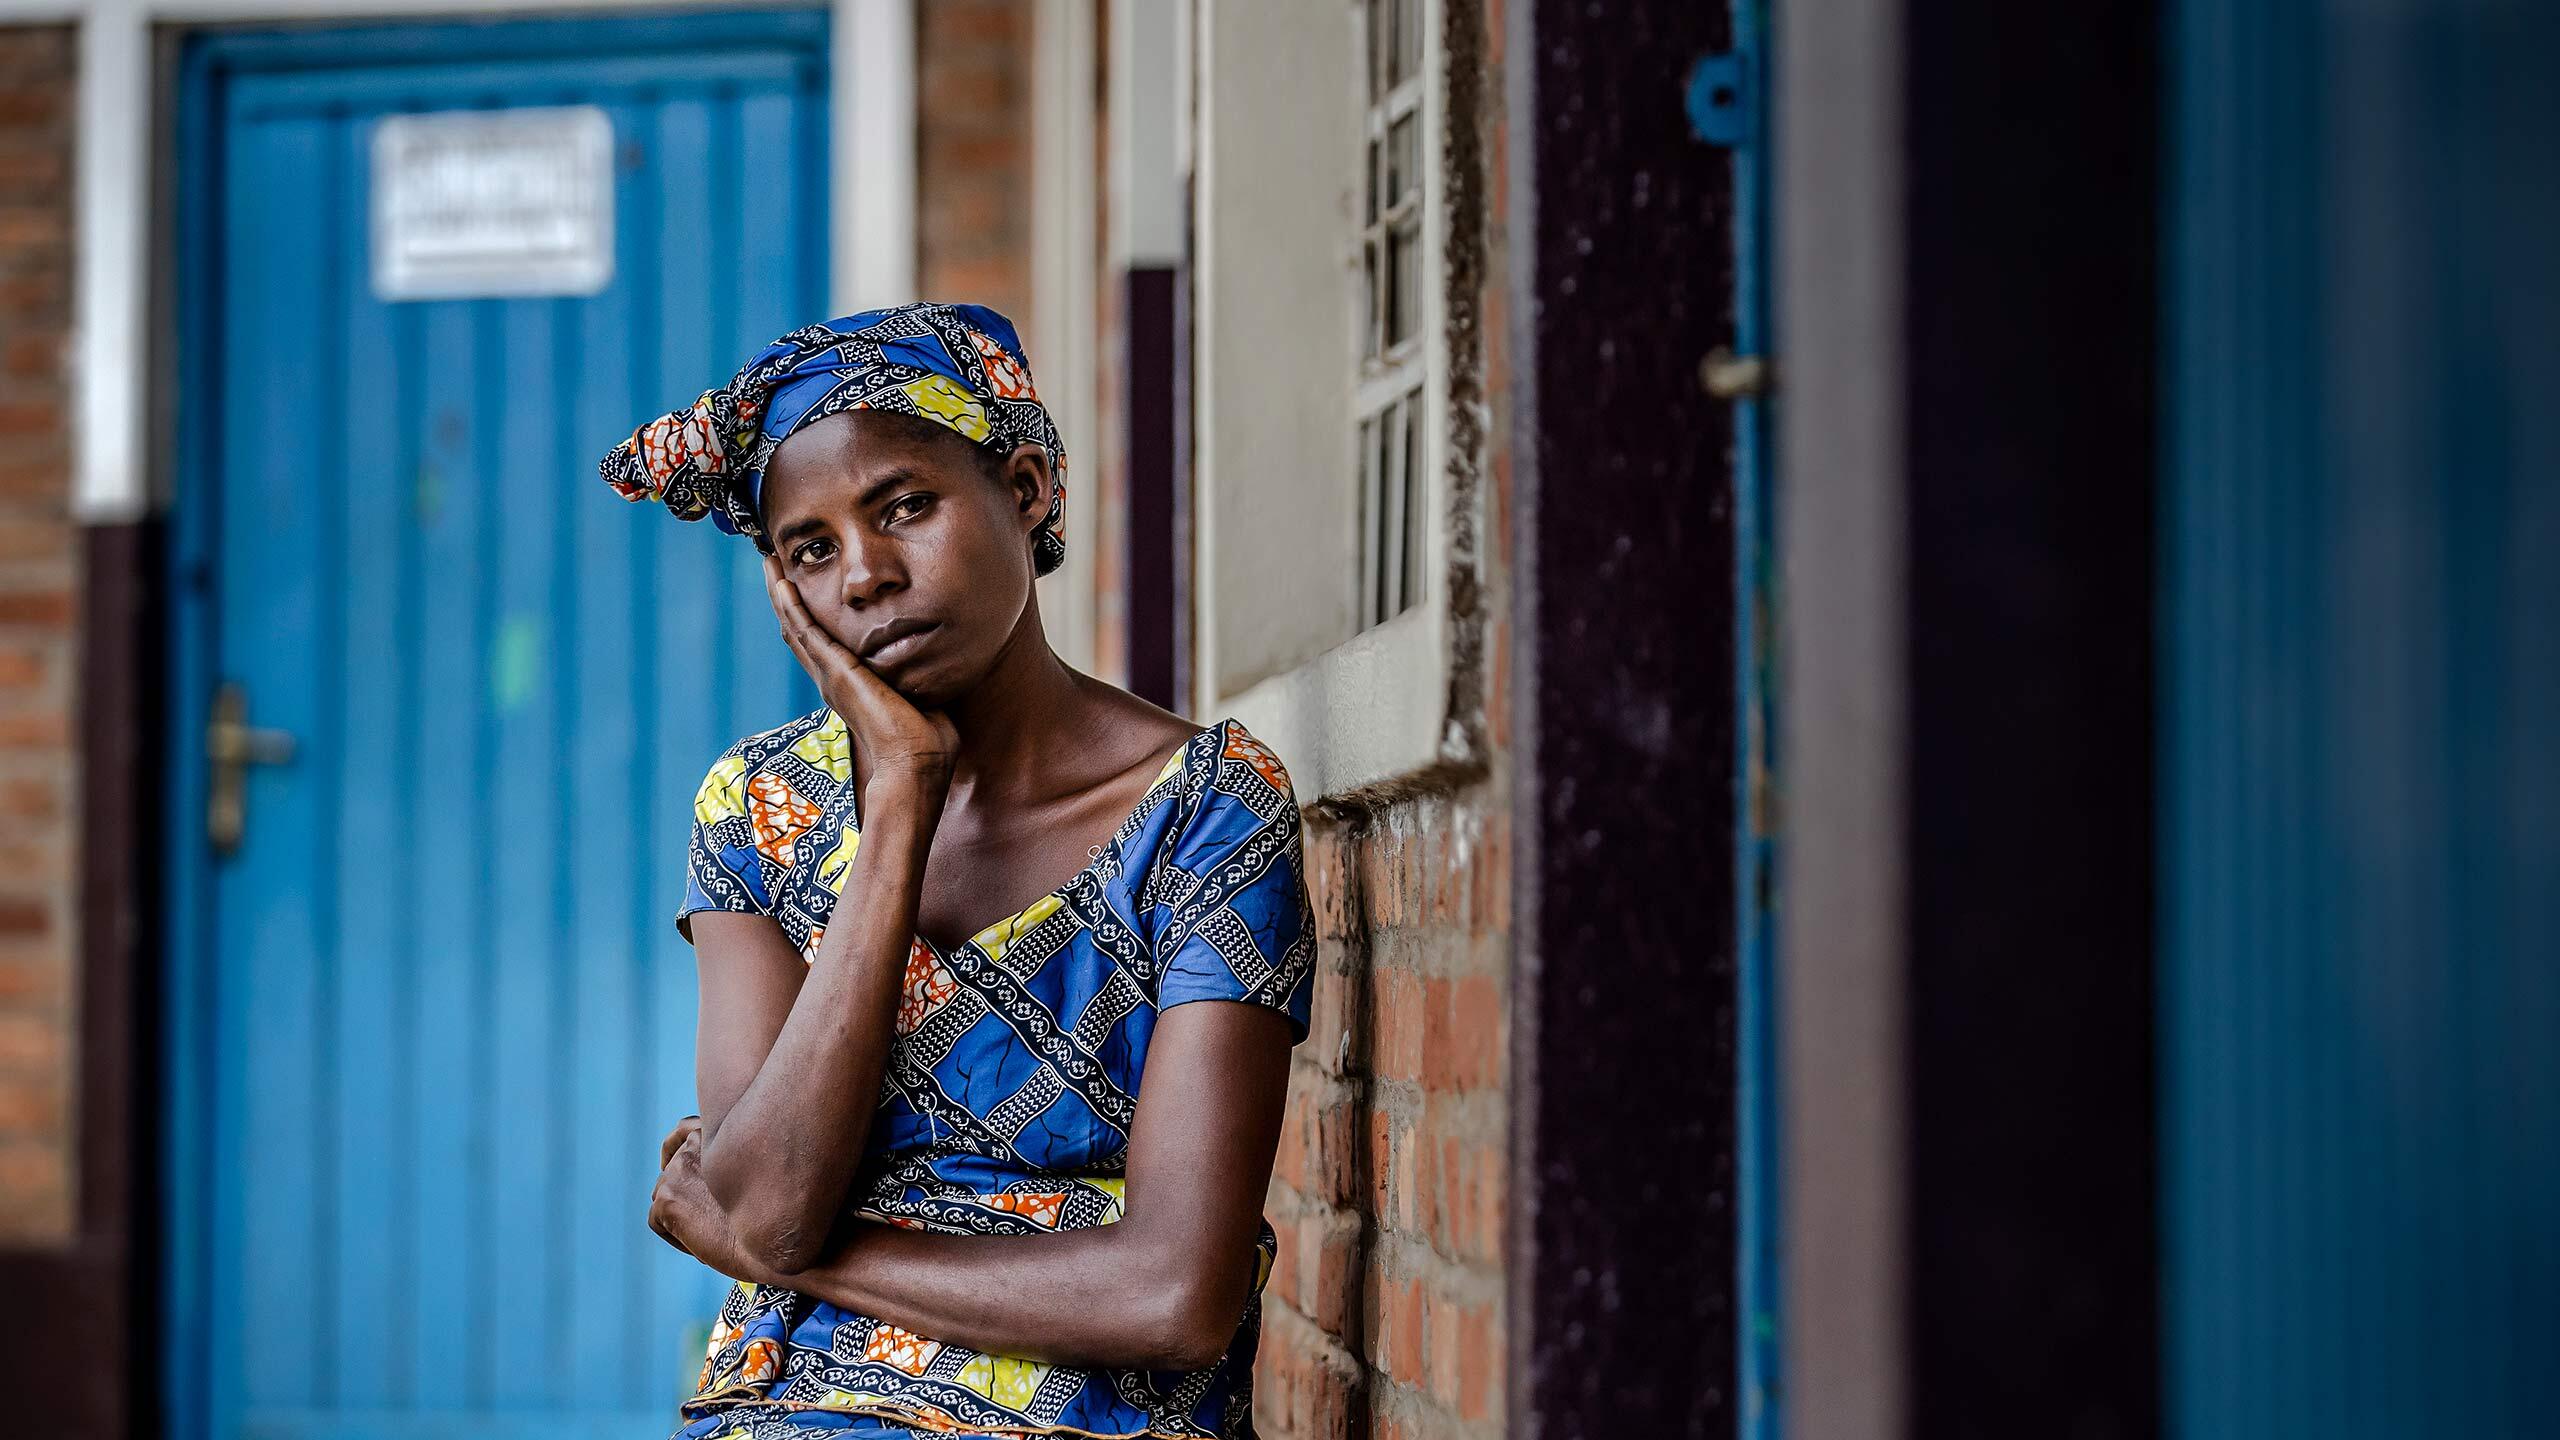 The same clarion call rang out around the world. In the Democratic Republic of the Congo, a survivor of sexual violence shared her harrowing story and her recommendations to help the international community increase the accountability of the humanitarian system. 